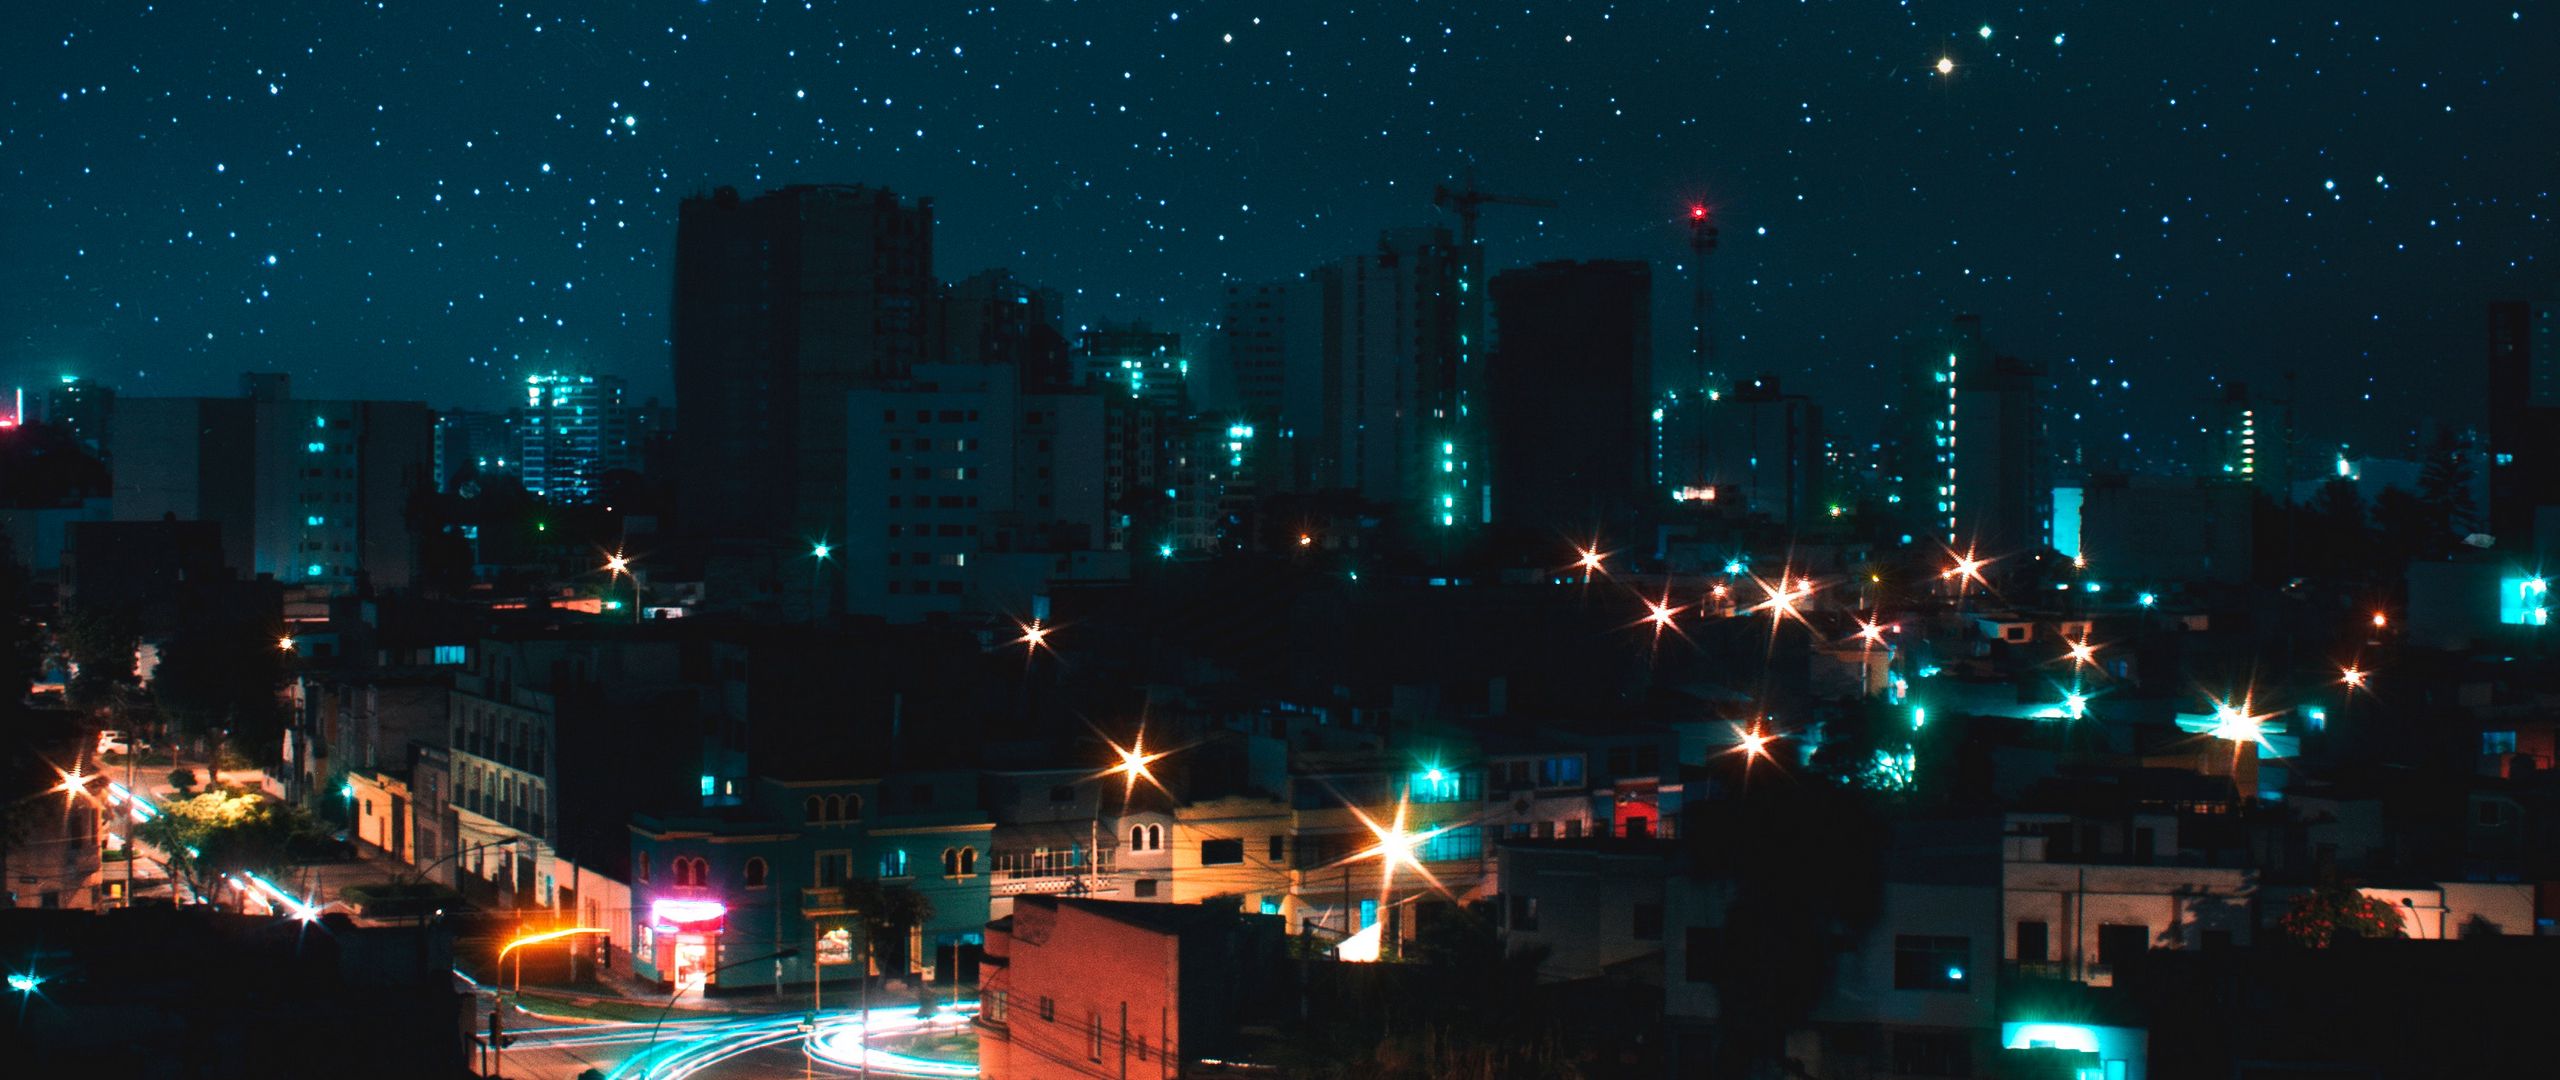 A city at night with the stars in the sky - City